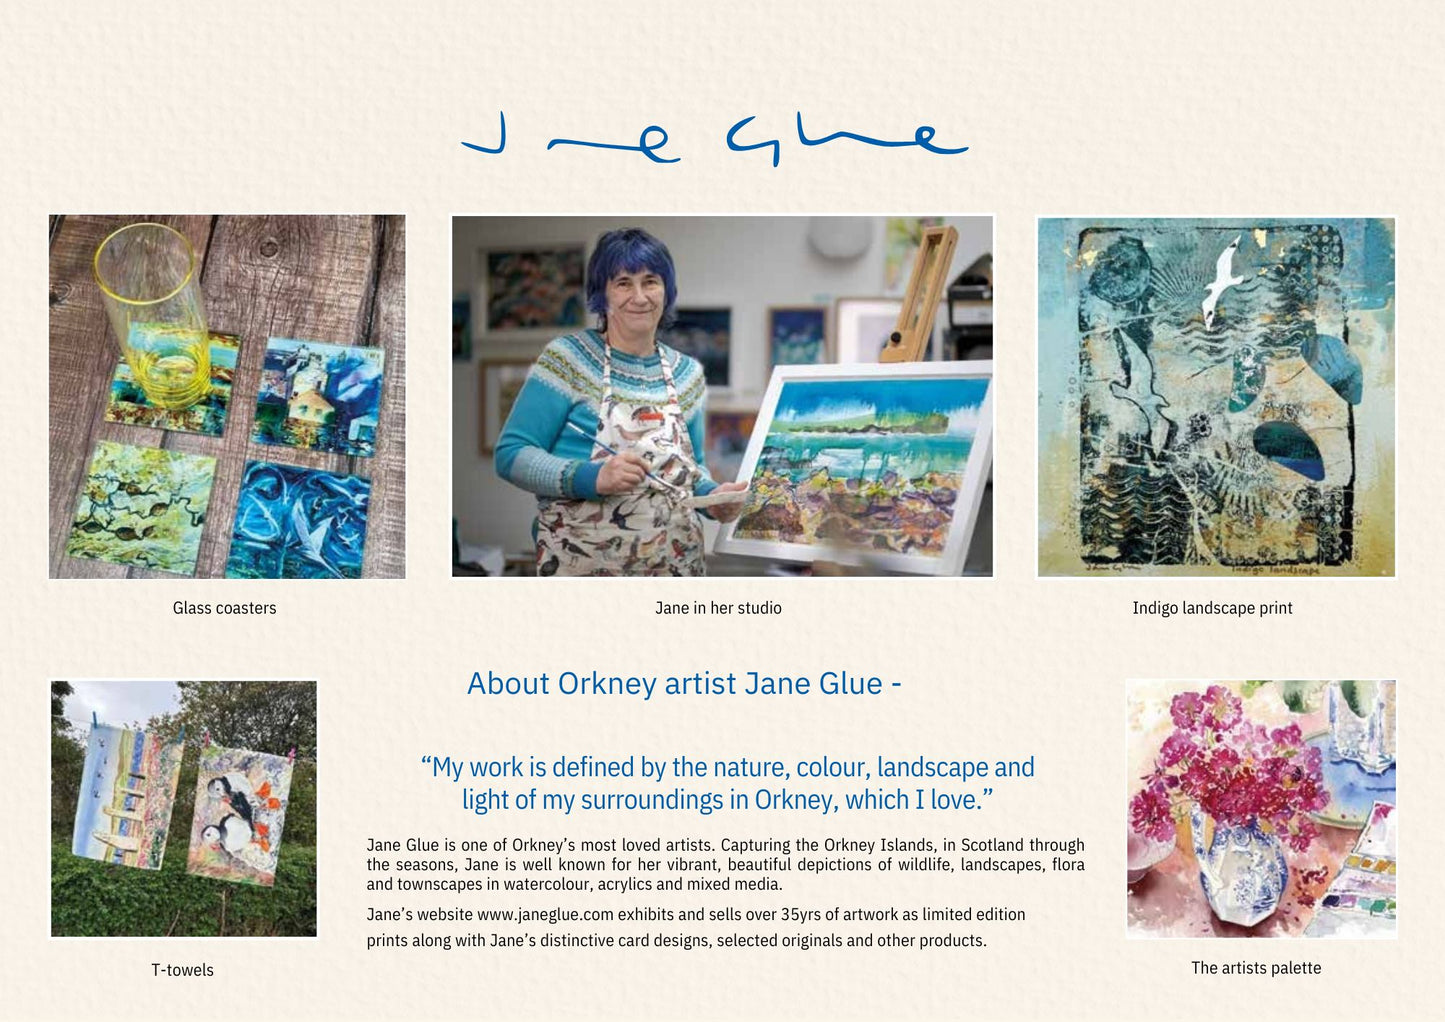 Orkney calendar 2025 about artist Jane Glue page including a photograph of Jane Glue in her studio